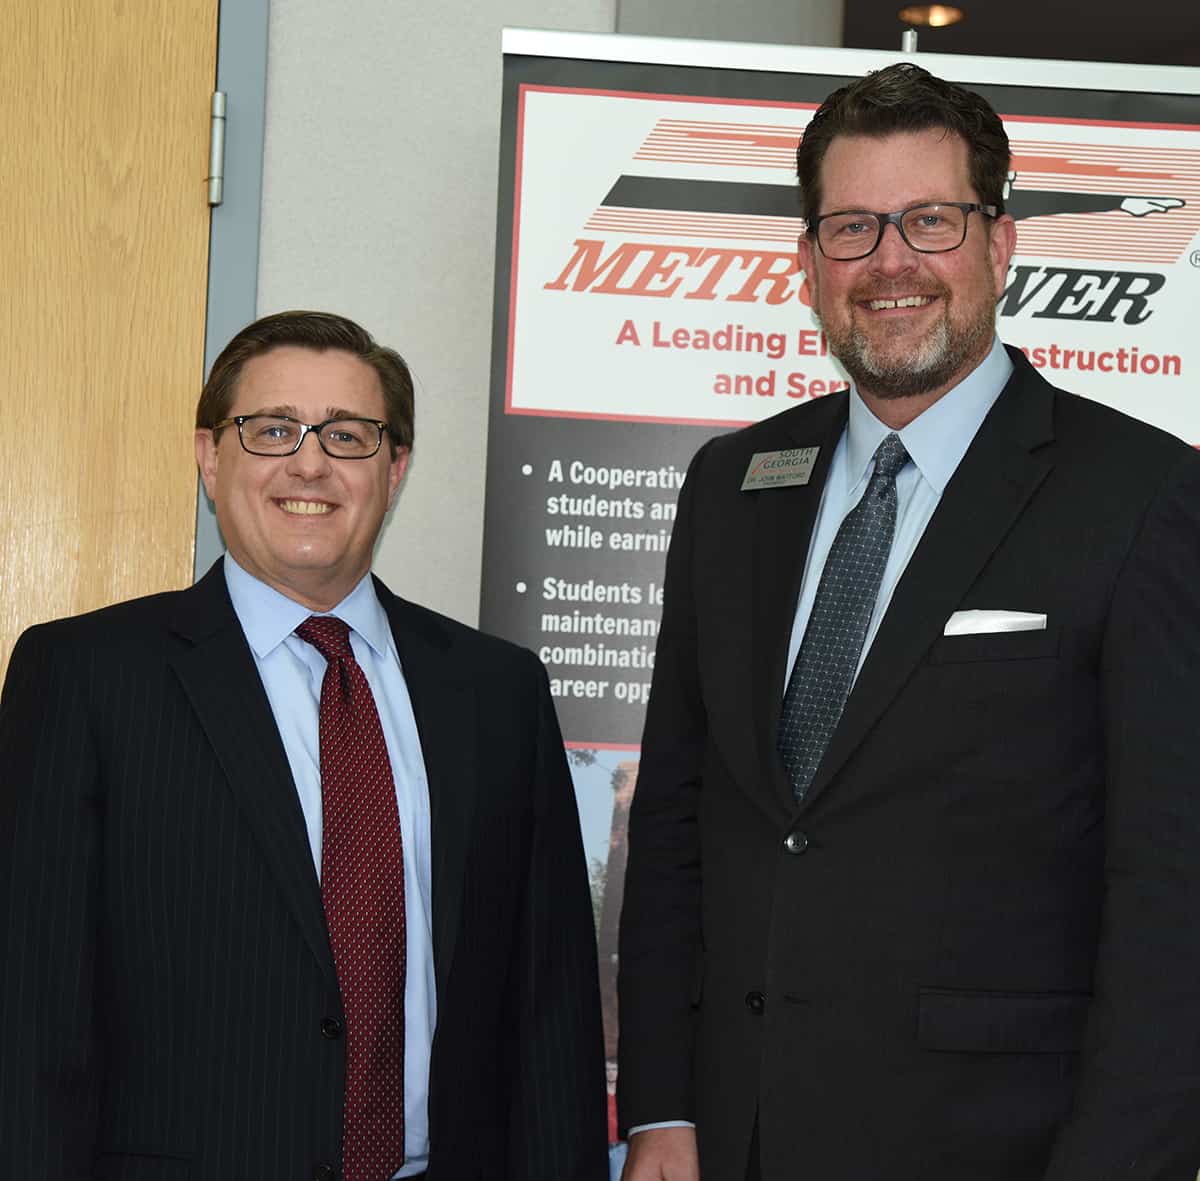 Georgia Commissioner of Labor Mark Butler is shown above with South Georgia Technical College President Dr. John Watford. Dr. Watford introduced Commissioner Butler at the Employer Summit held recently at South Georgia Technical College’s Crisp County Center.